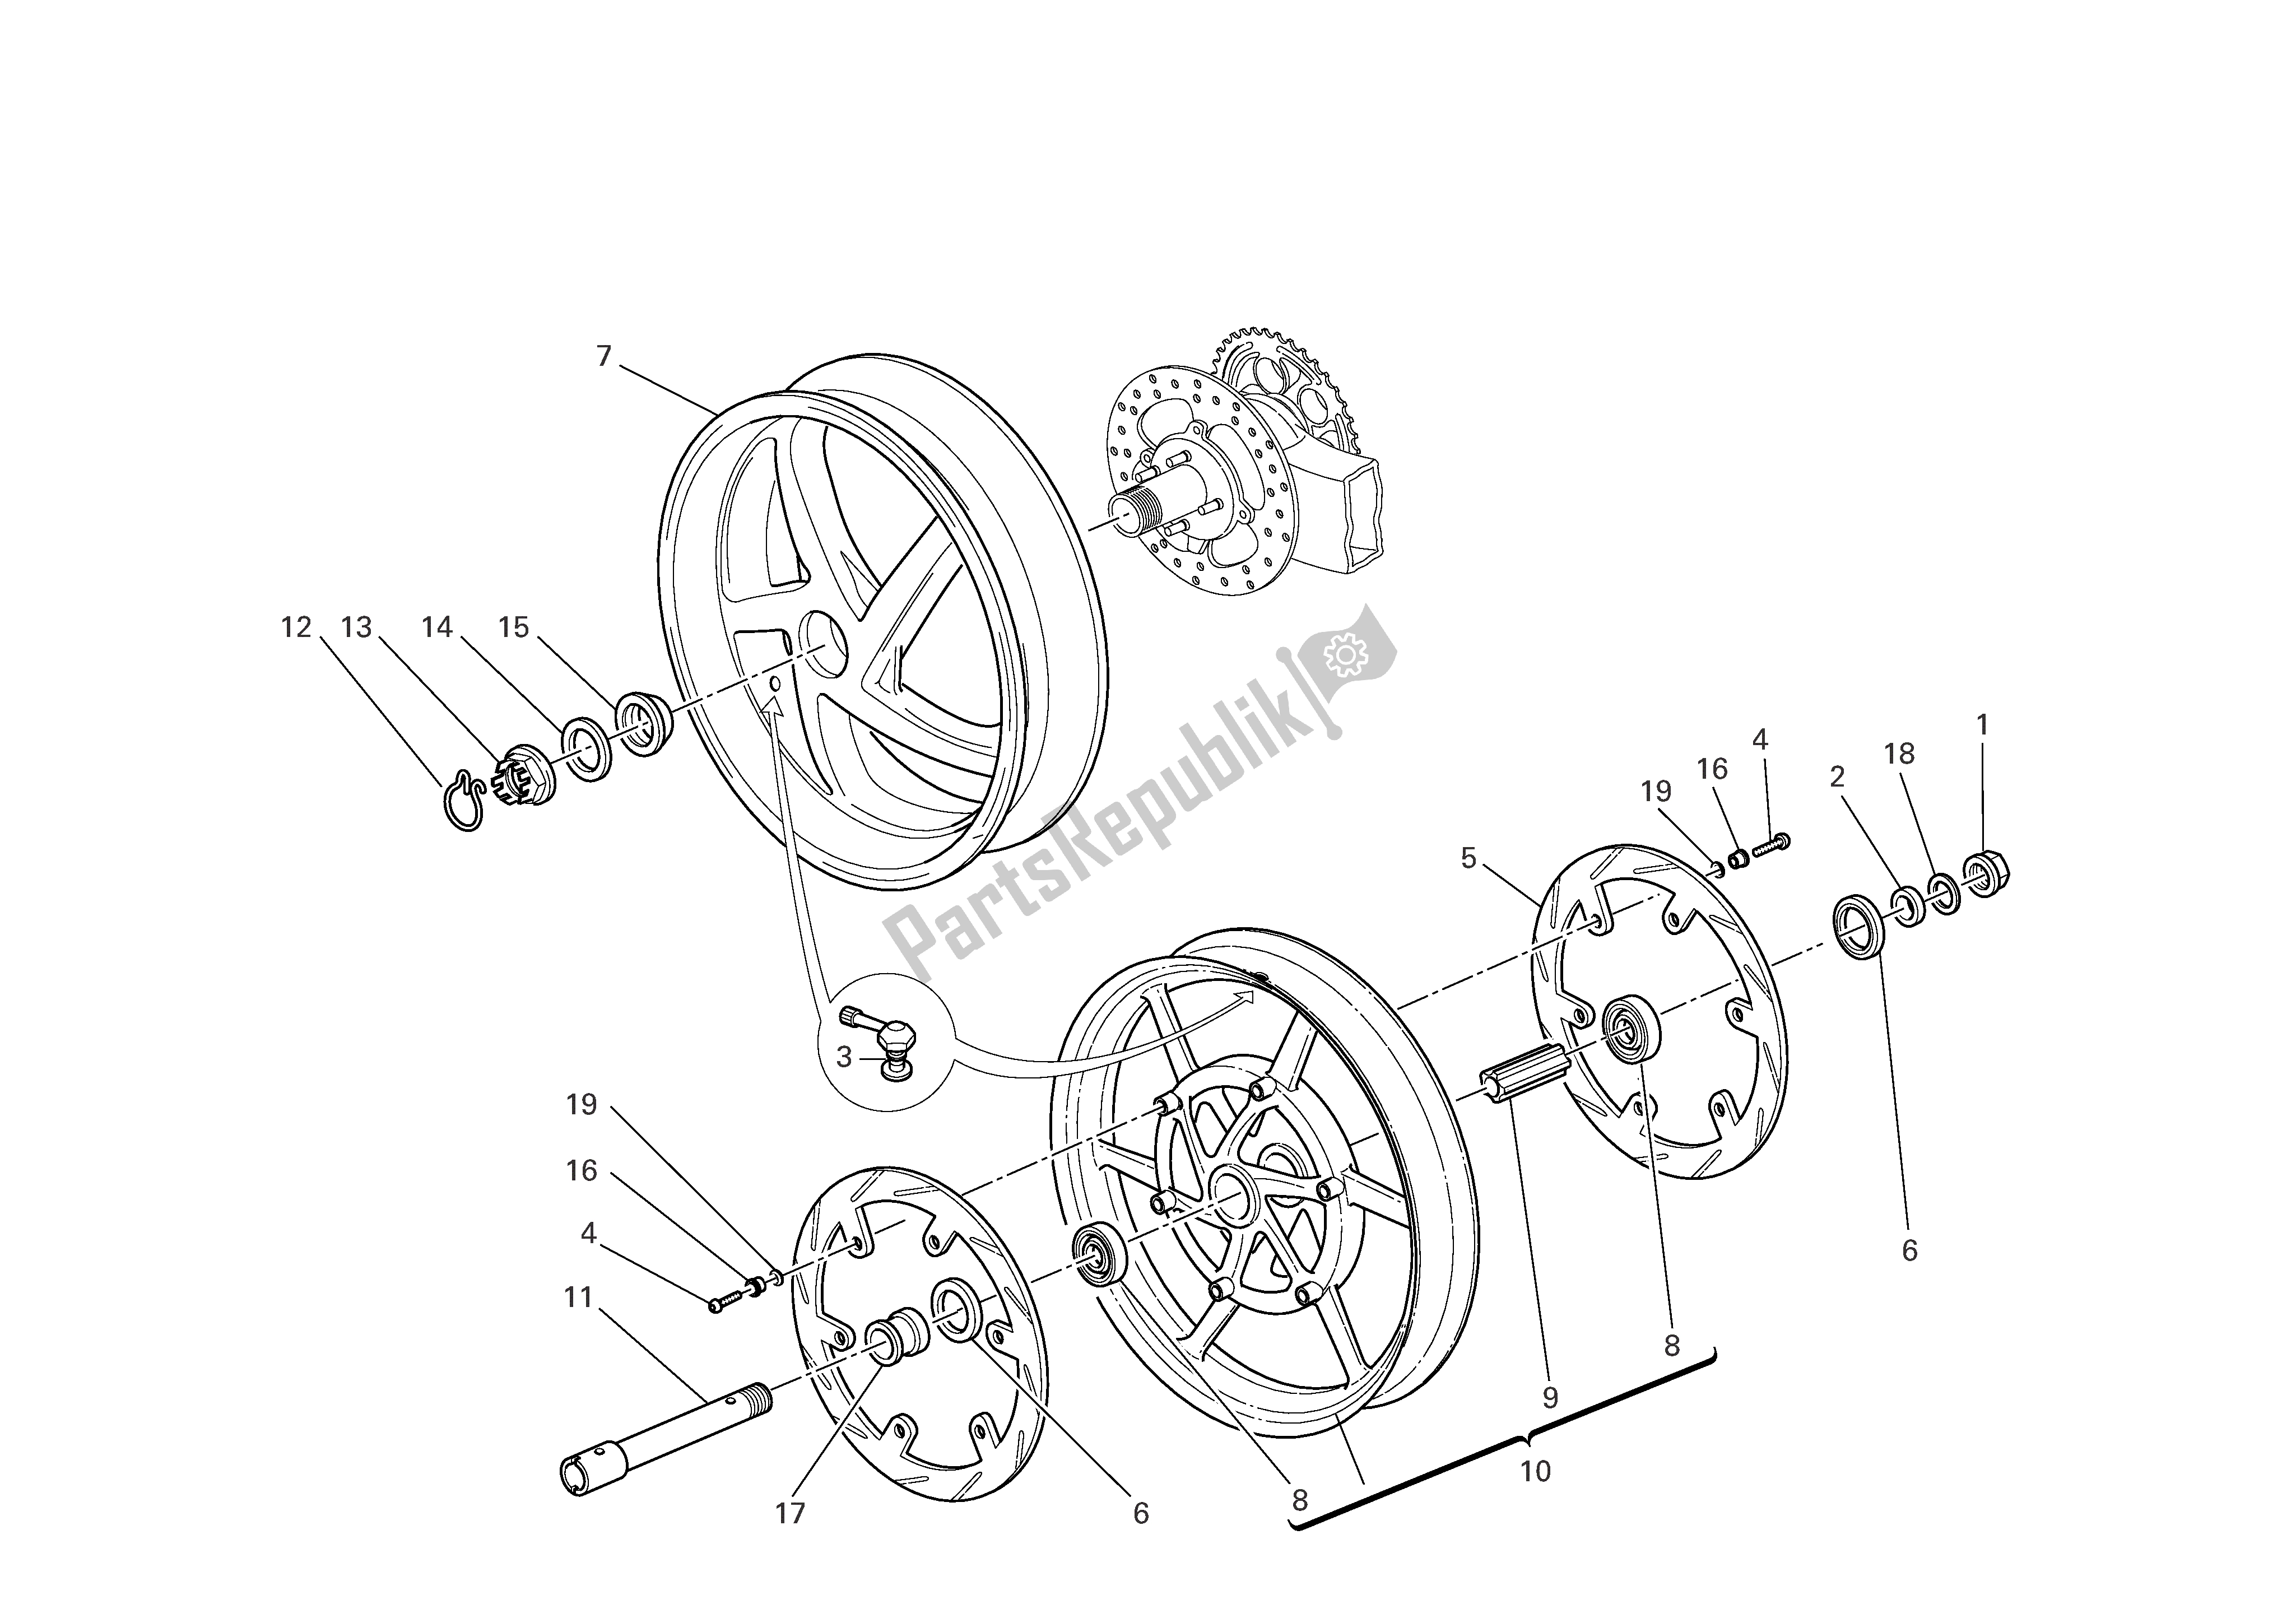 All parts for the Front And Rear Wheels of the Ducati Multistrada 1000 2005